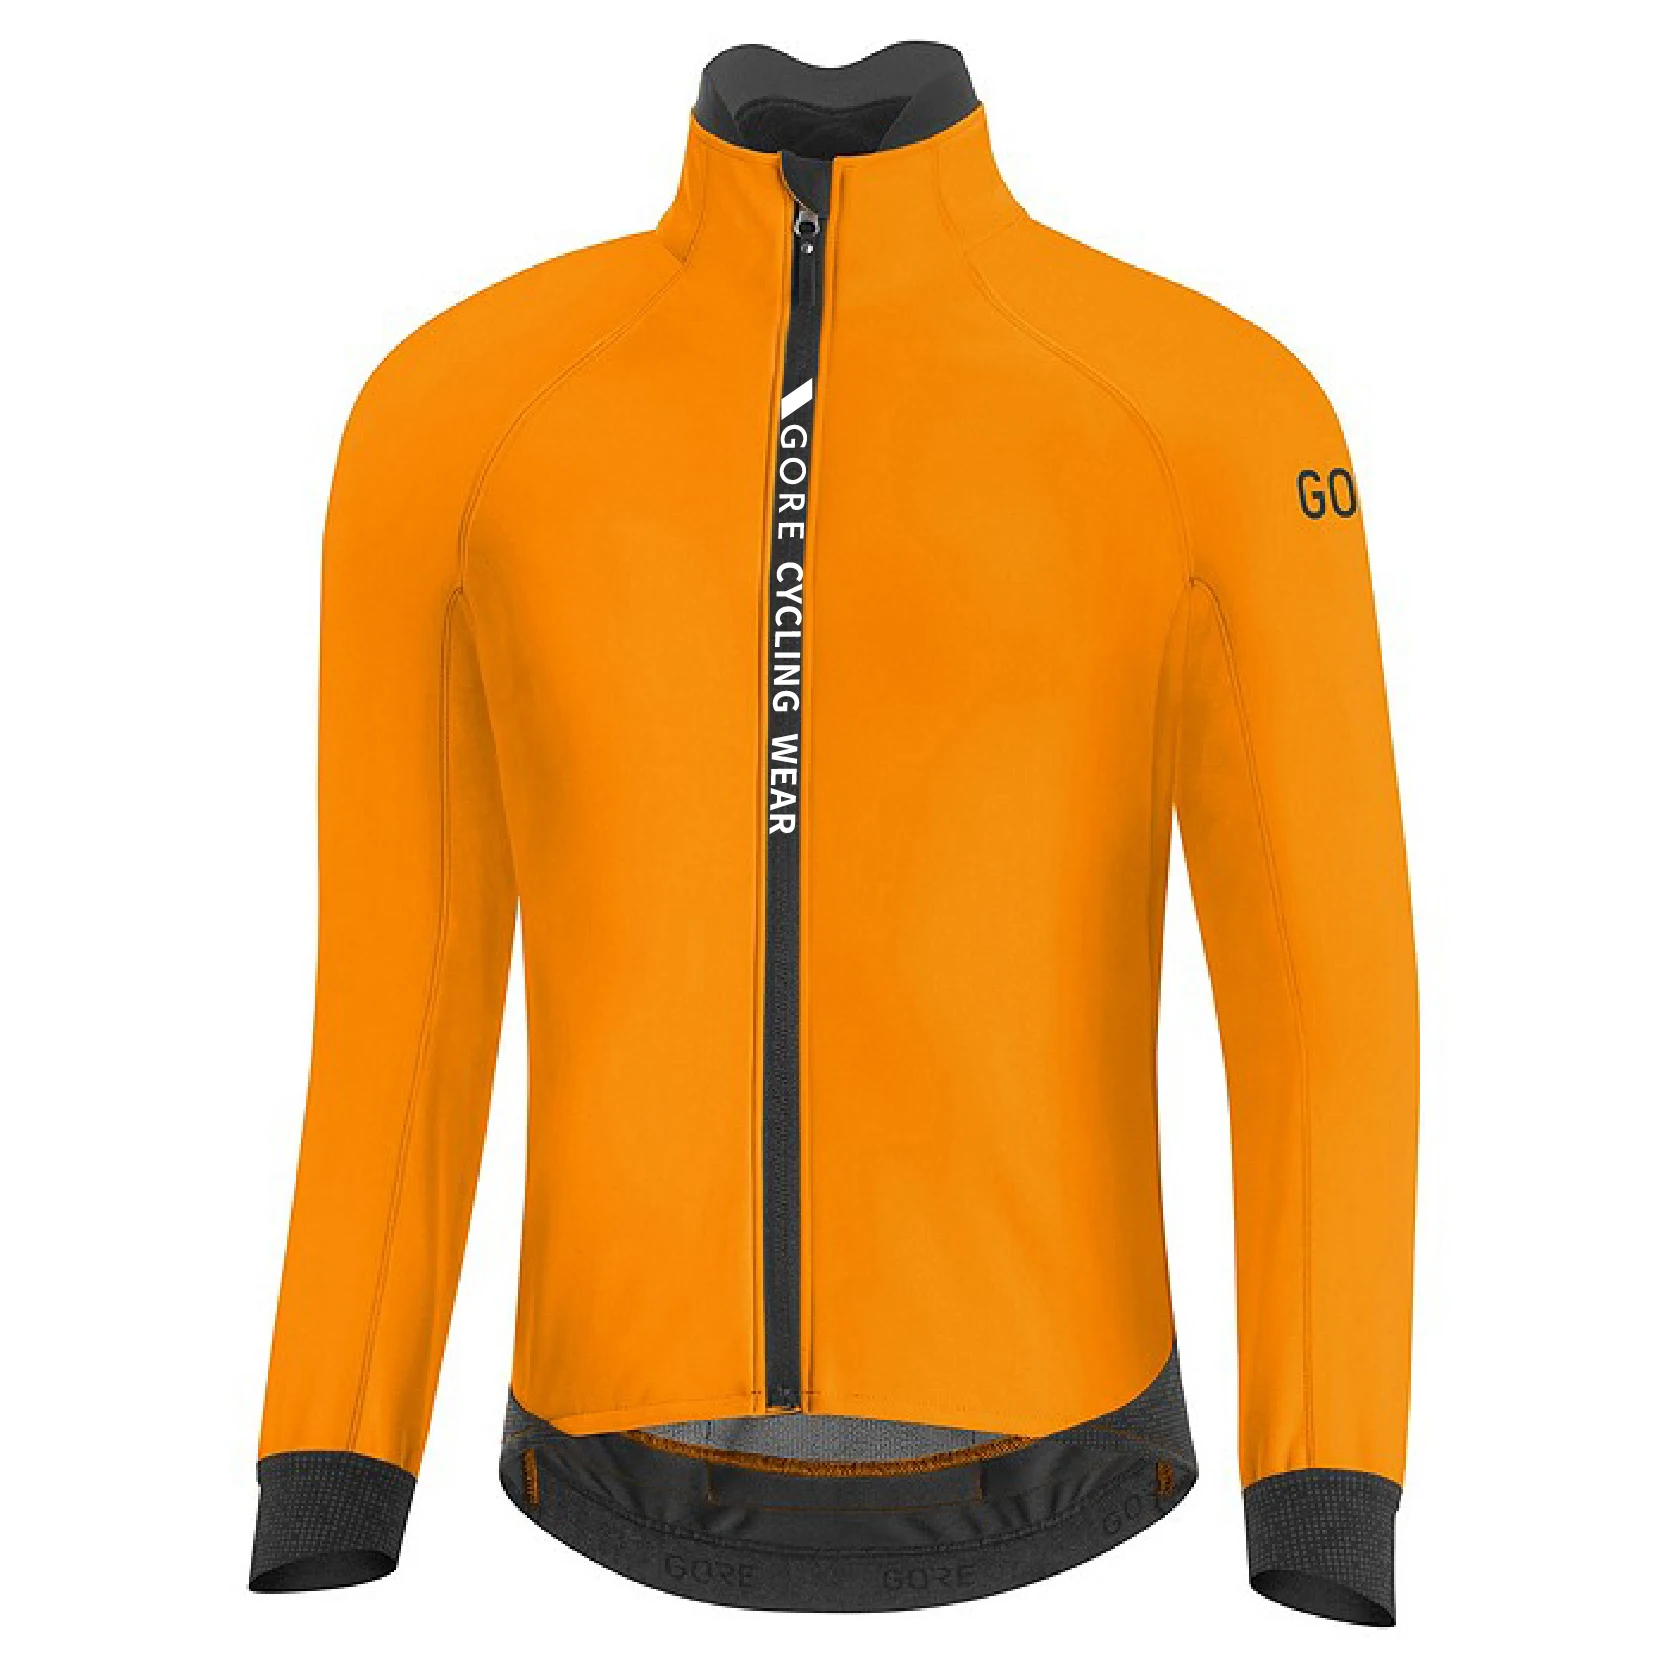 Winter GORE Cycling Wear Team Warm Jacket Men's Thick Thermal Fleece Bicycle Clothing MTB Long Sleeve Wool Tops Road Bike Jersey